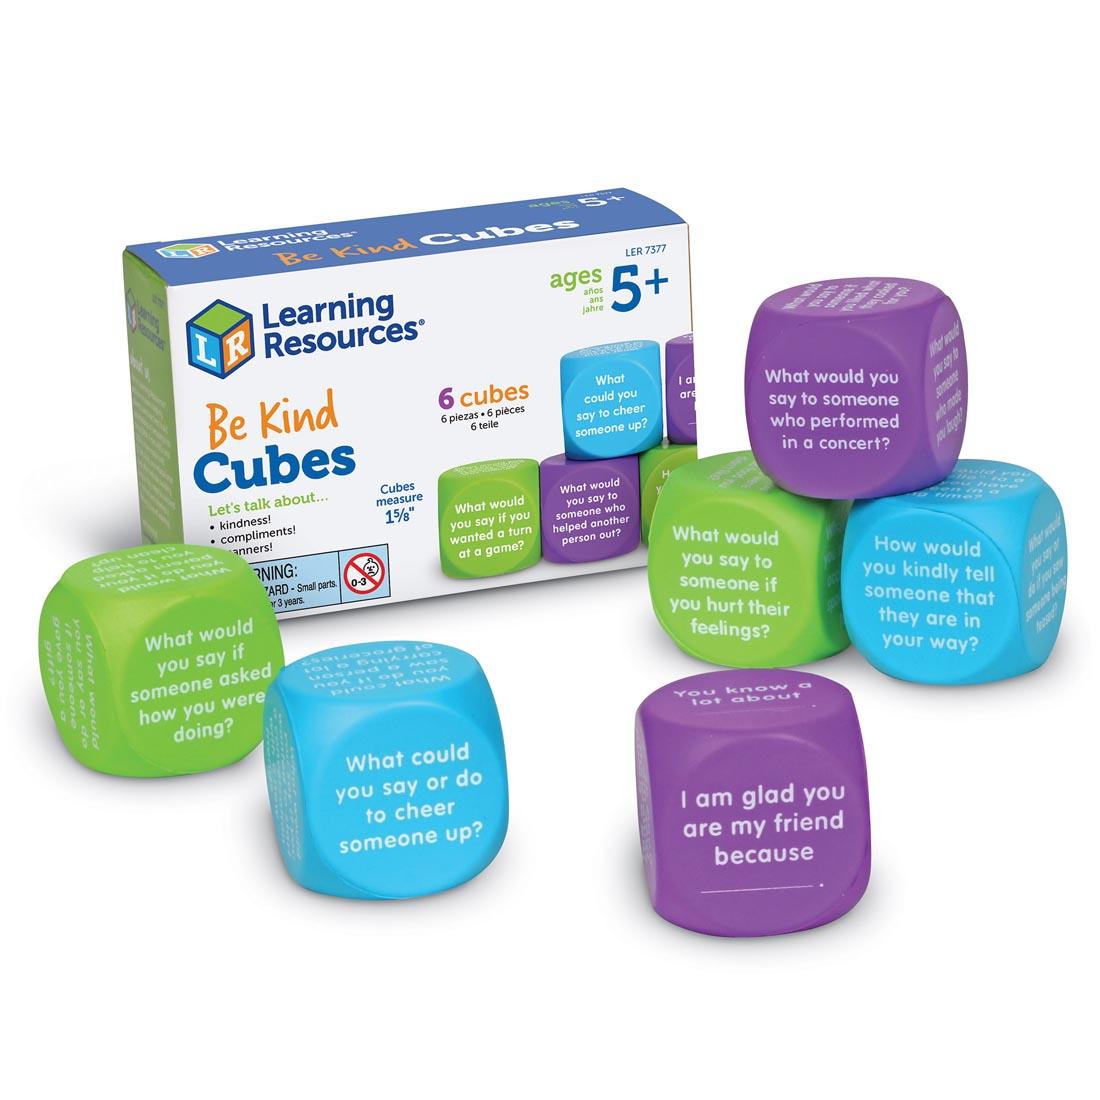 Be Kind Cubes By Learning Resources shown outside of packaging